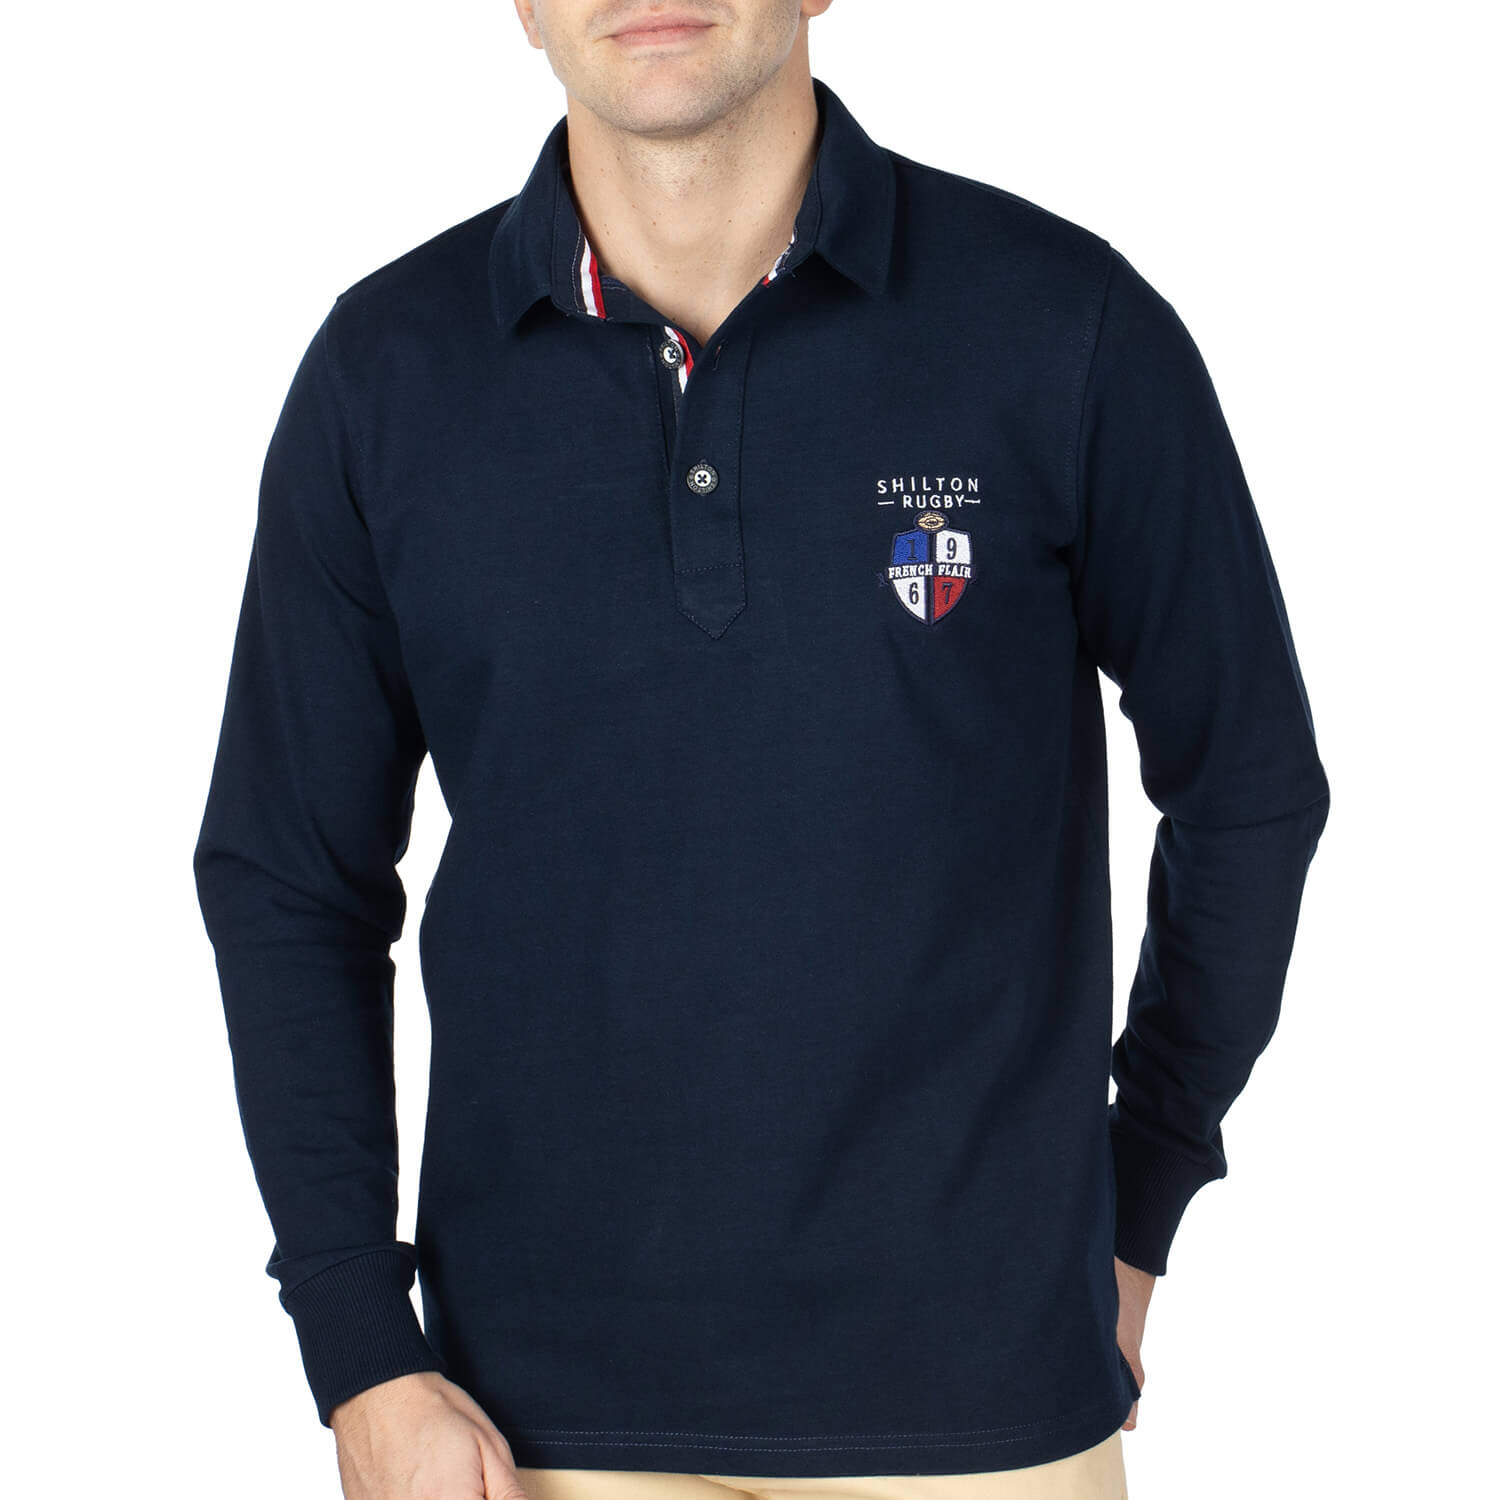 Polo rugby french flair Navy - Shilton